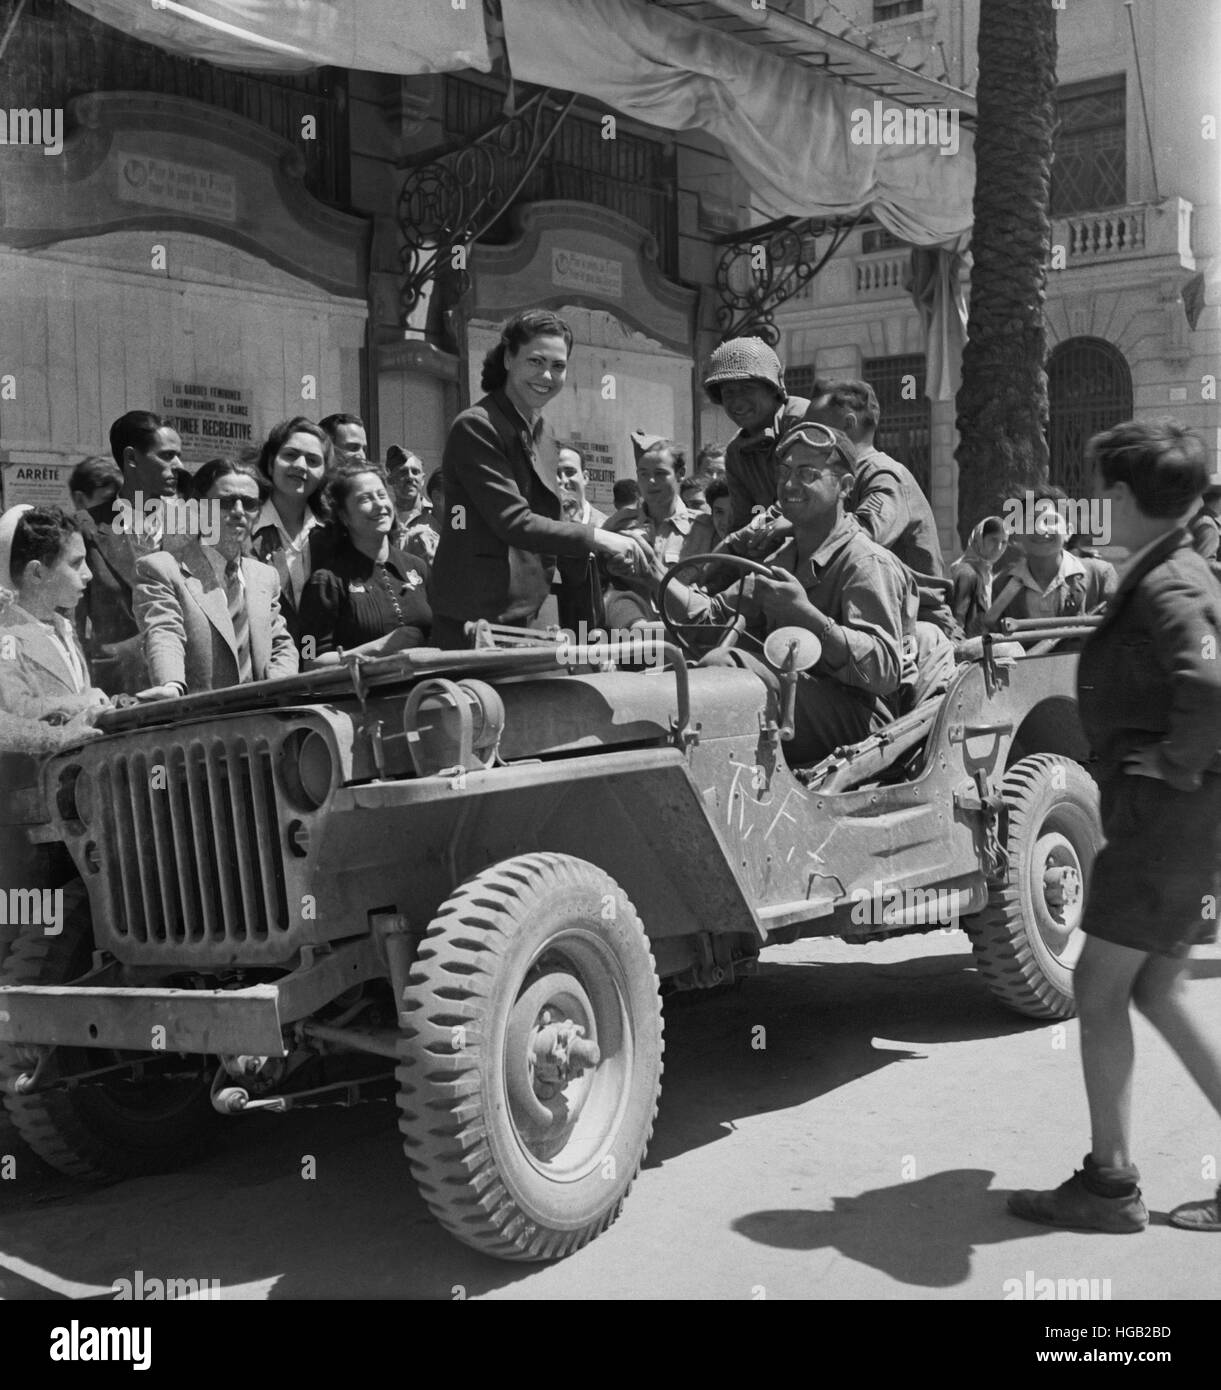 Girls climb on the Jeeps to greet American invading troops in the streets of Tunis, Tunisia, 1943. Stock Photo